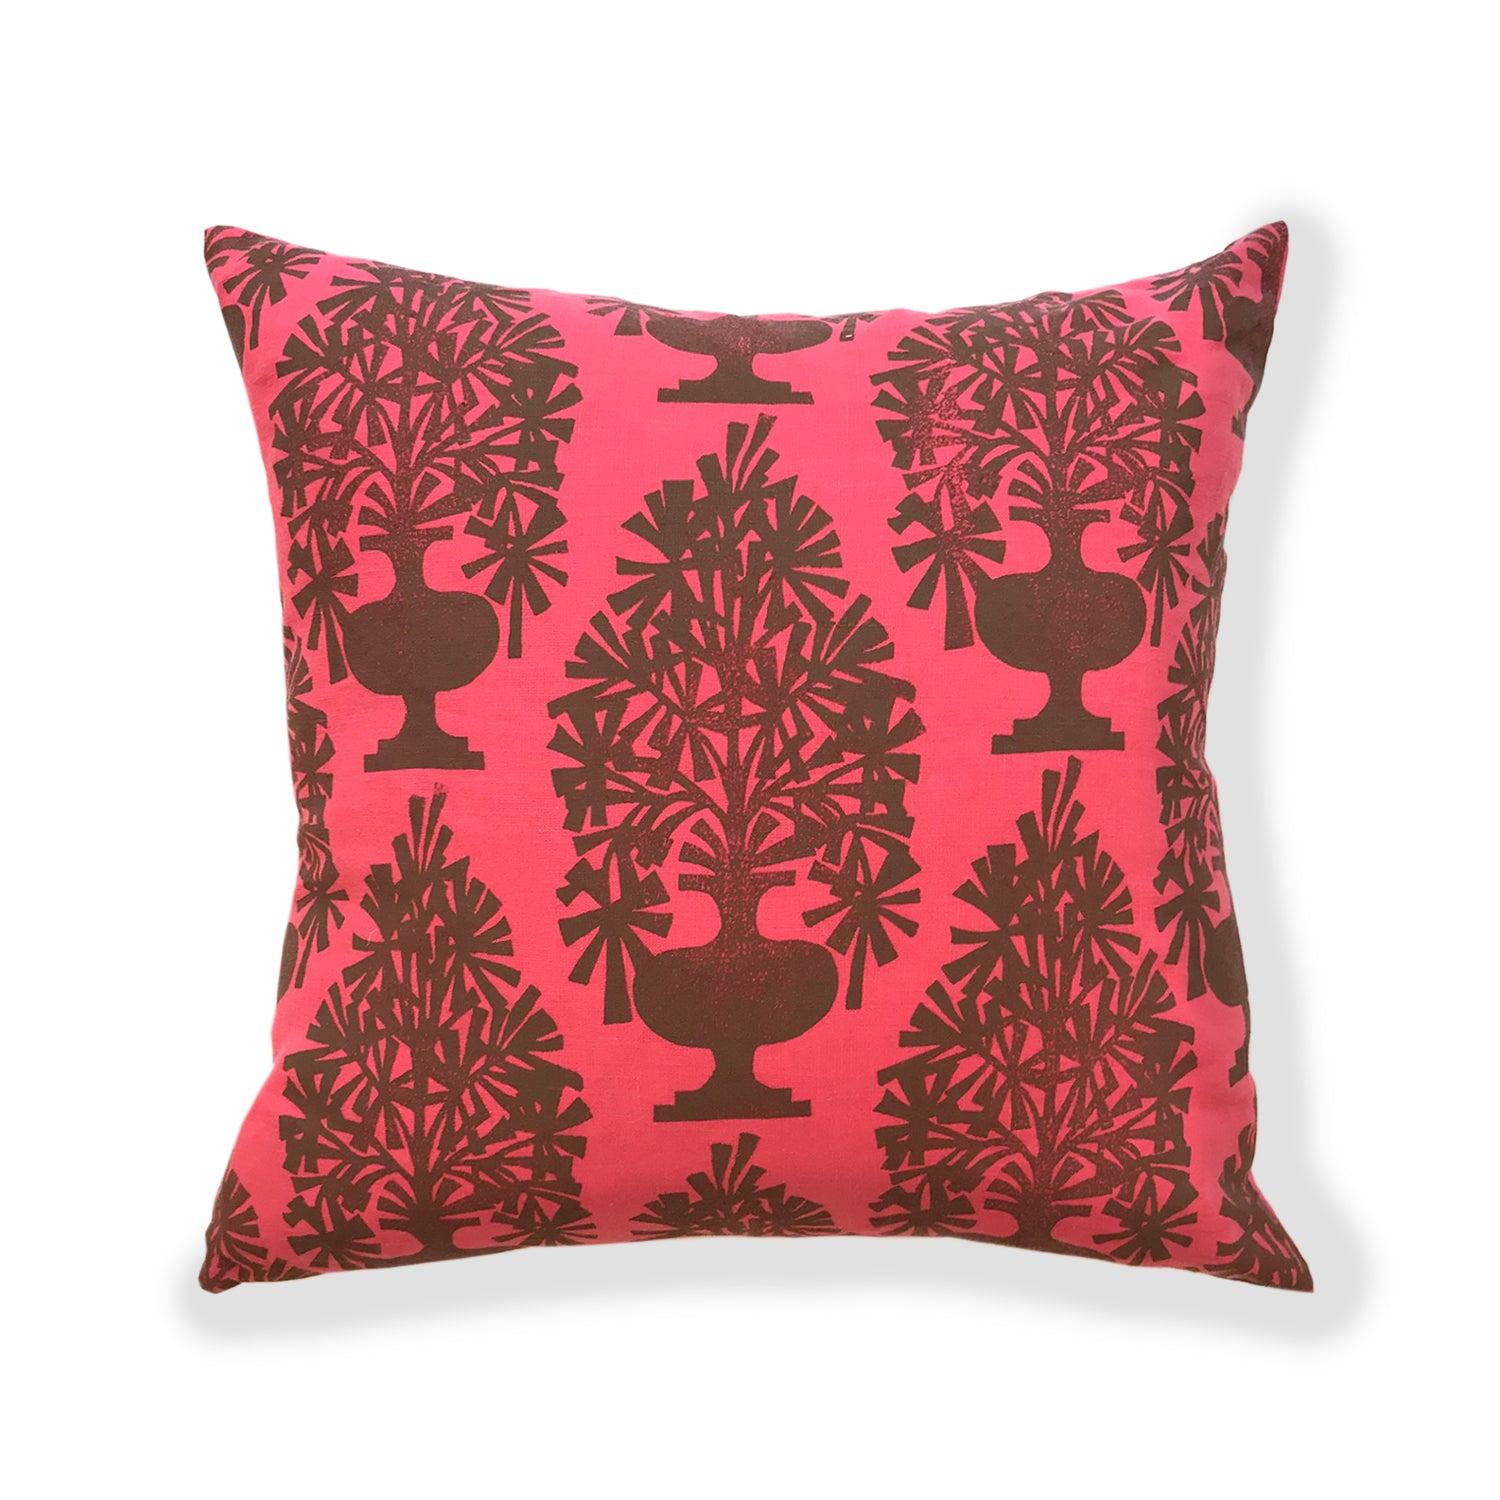 Square throw pillow with a repeating pattern of geometric vases of flowers in brown on a pink field.